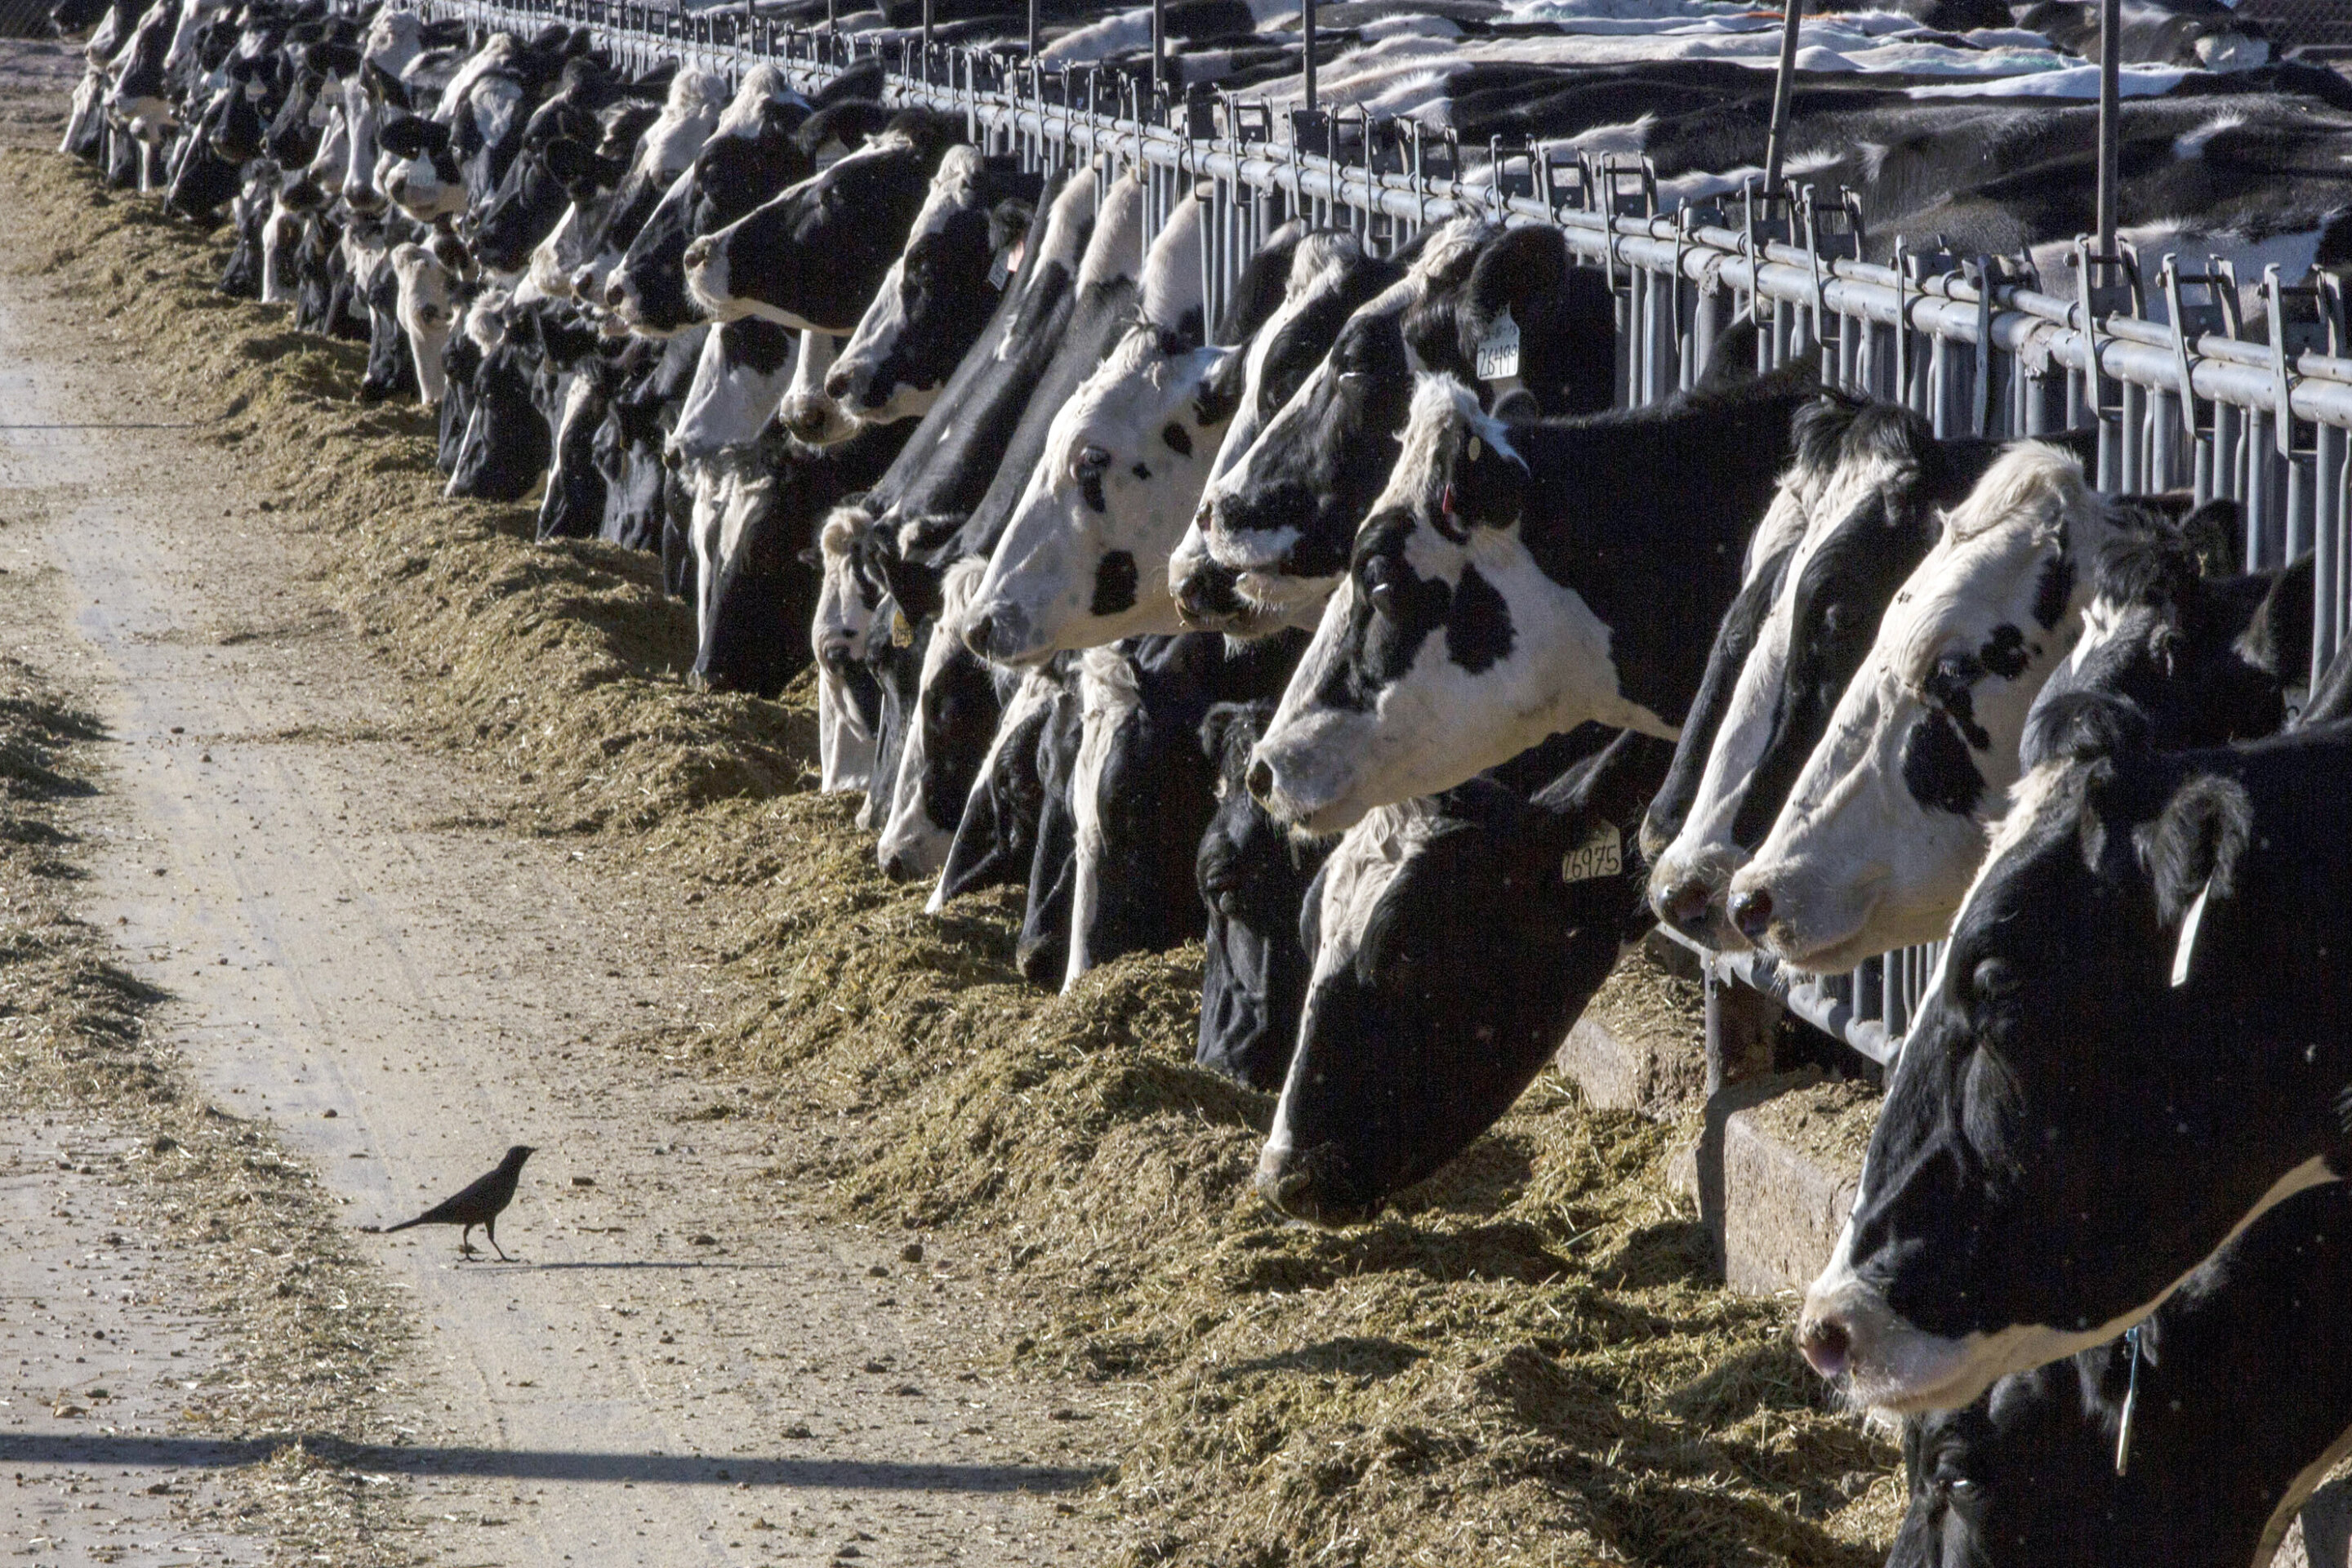 #Bird flu virus detected in beef from an ill dairy cow, but USDA says meat remains safe